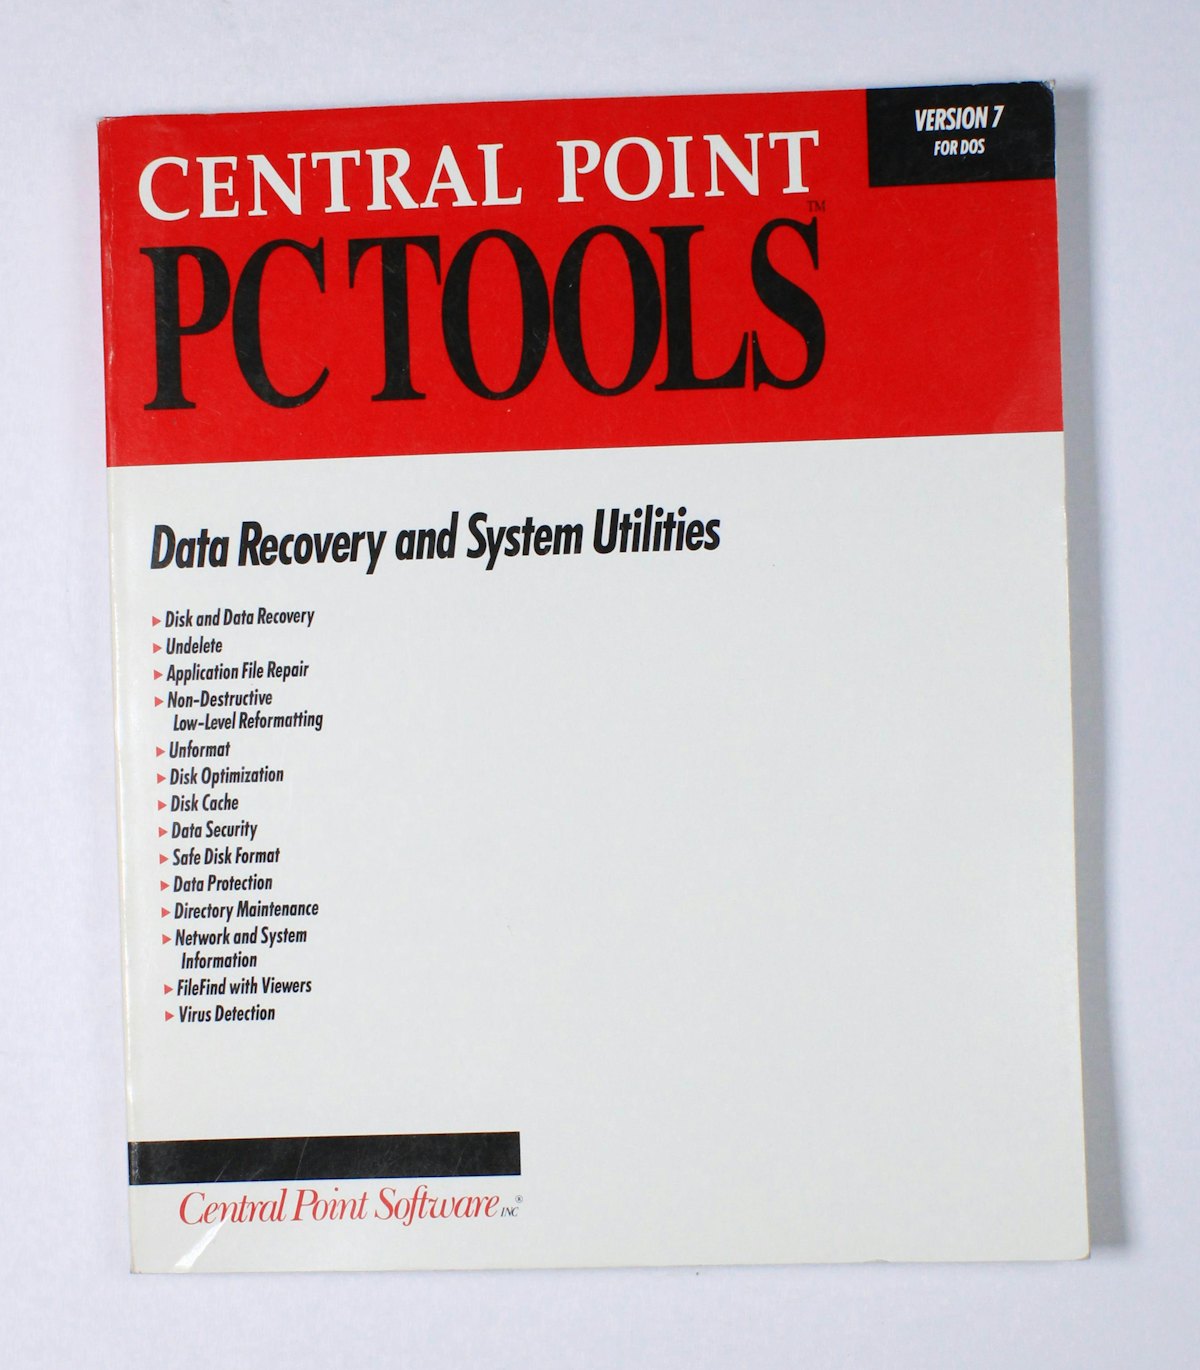 Central Point PC Tools: Data Recovery and System Utilities